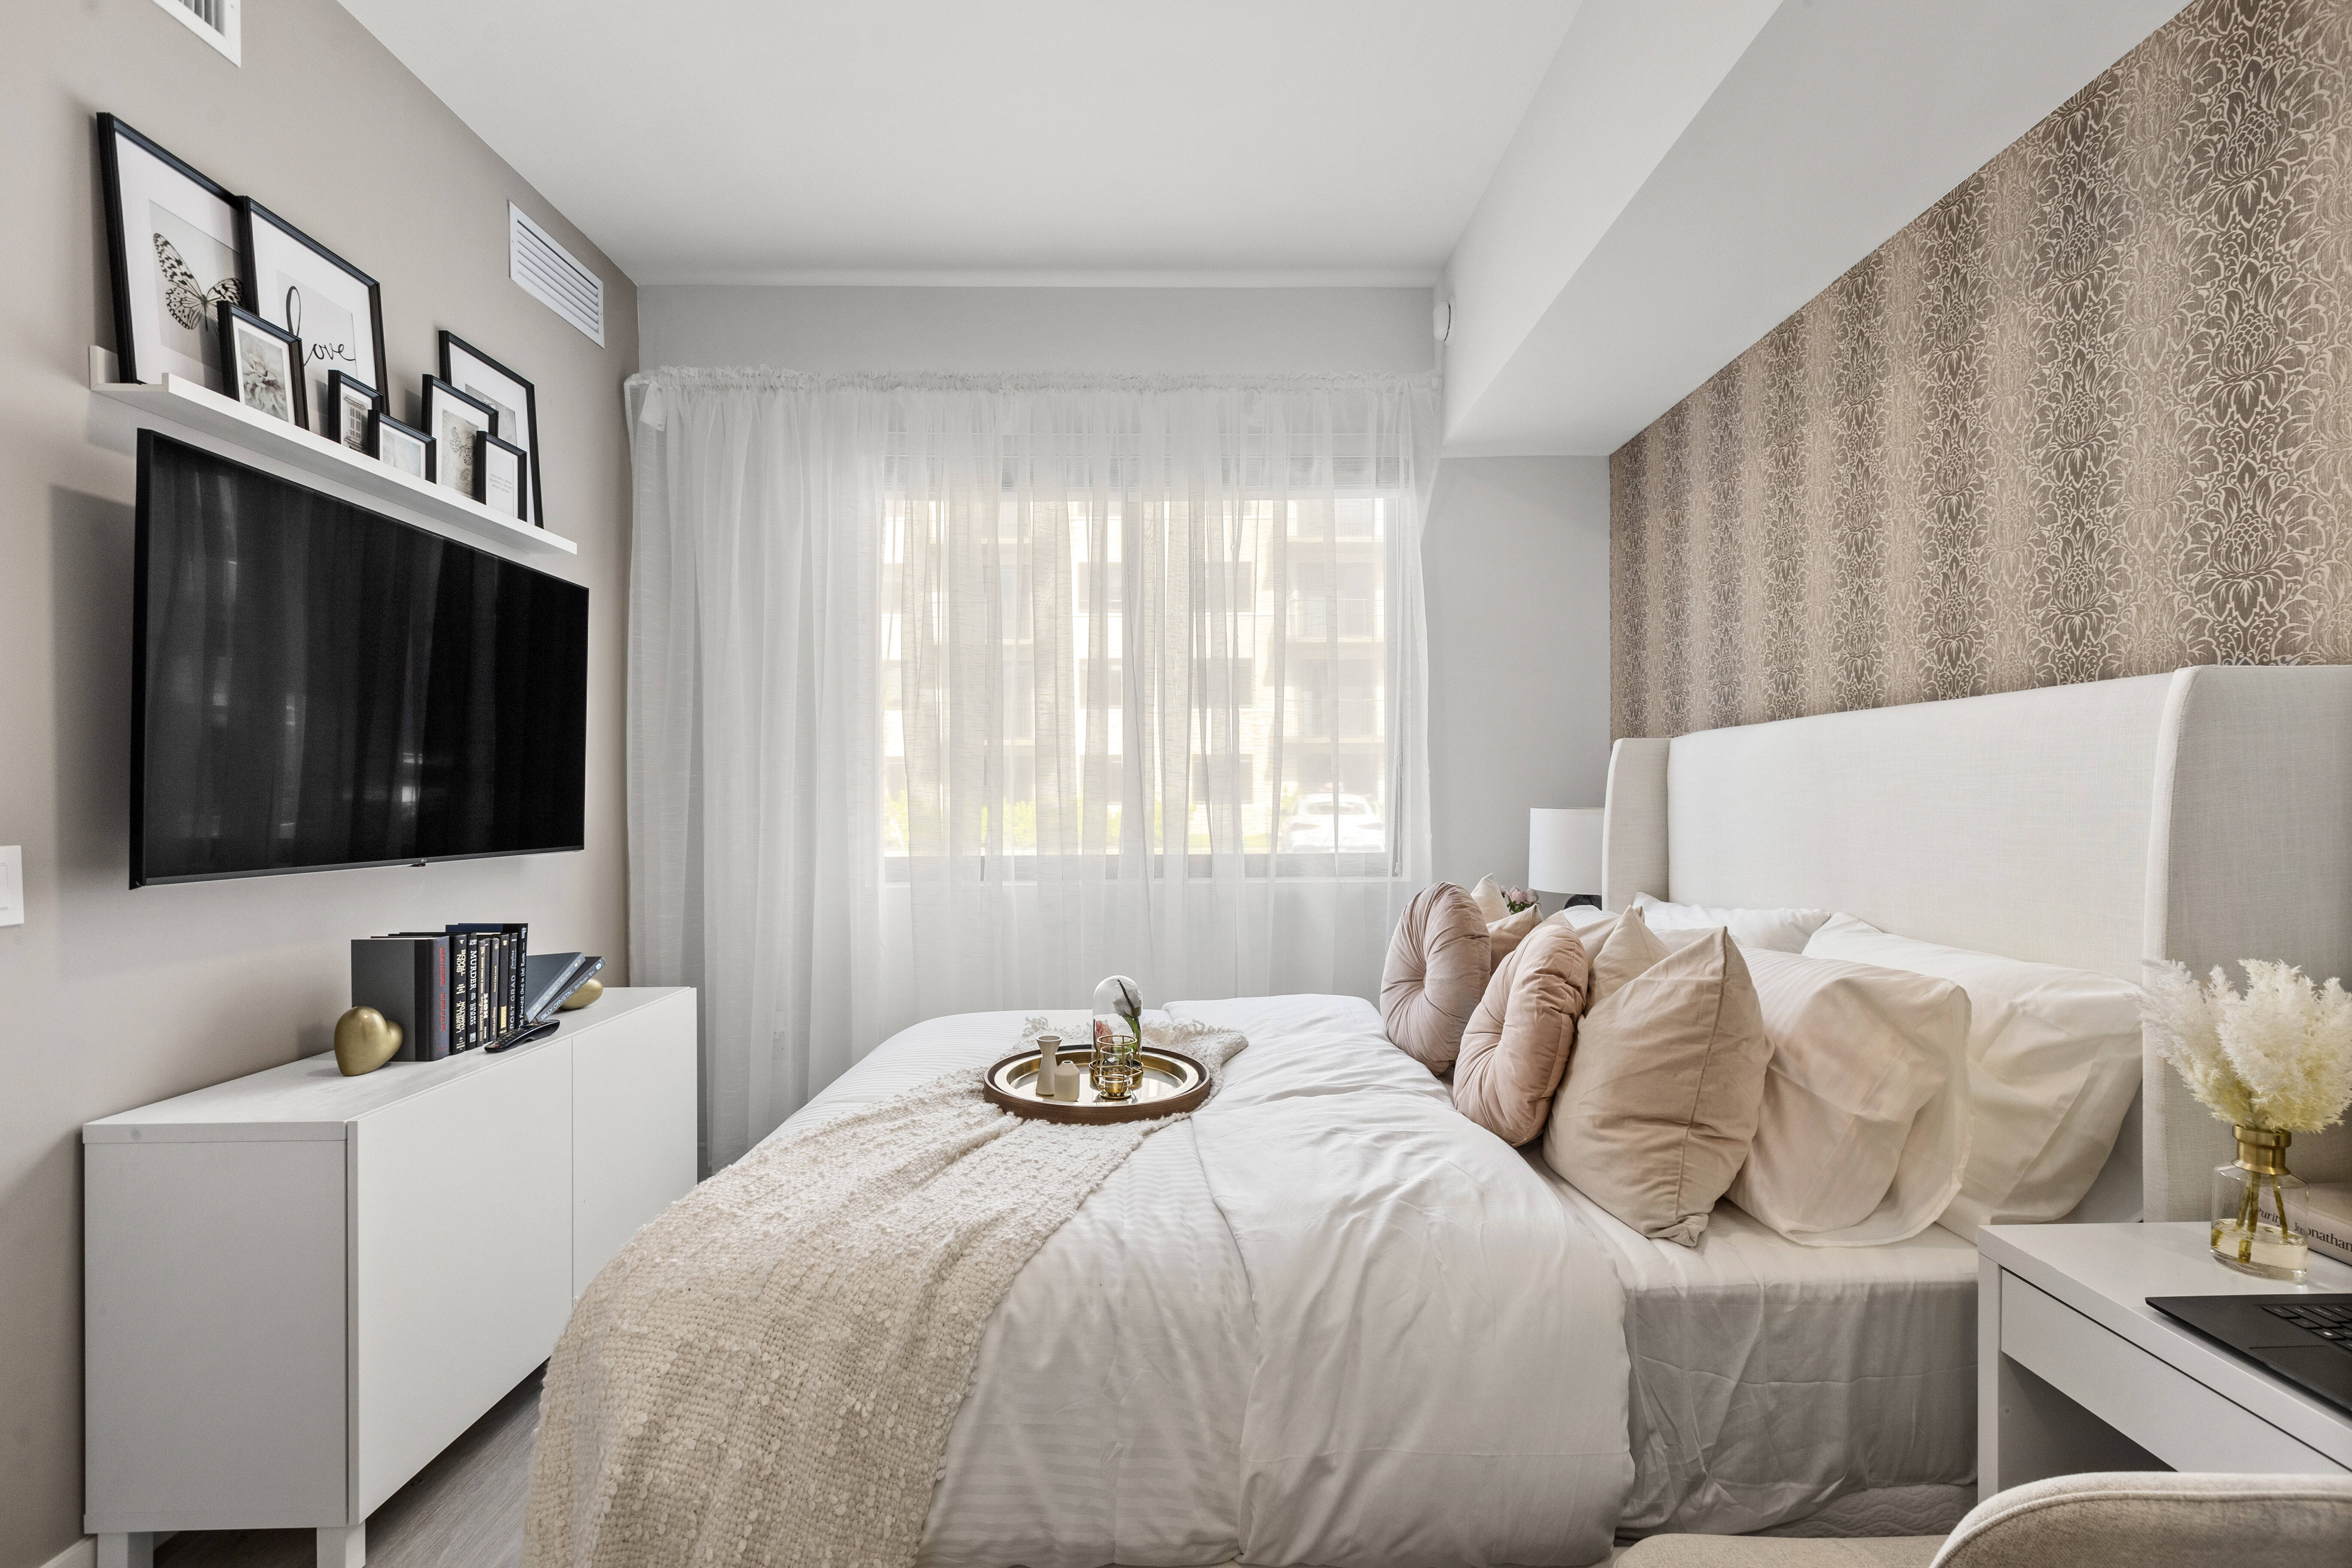 Experience the appeal of a furnished apartment model bedroom with natural light, modern furnishings, and wood-style flooring at Pine Ridge in West Palm Beach, Florida